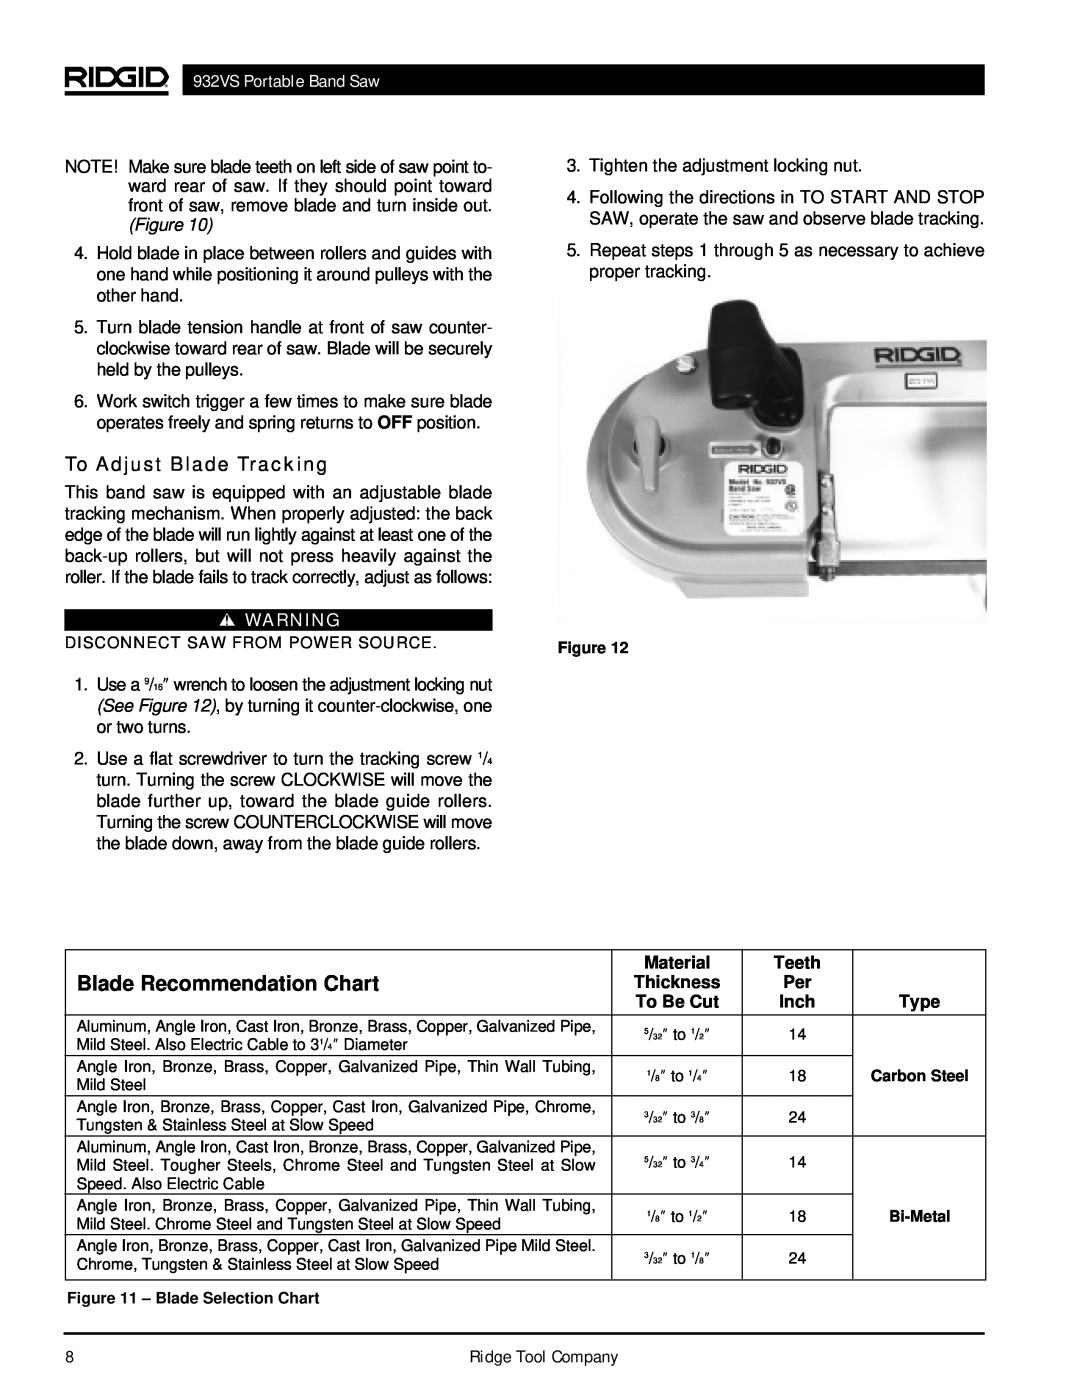 RIDGID manual Blade Recommendation Chart, To Adjust Blade Tracking, 932VS Portable Band Saw 